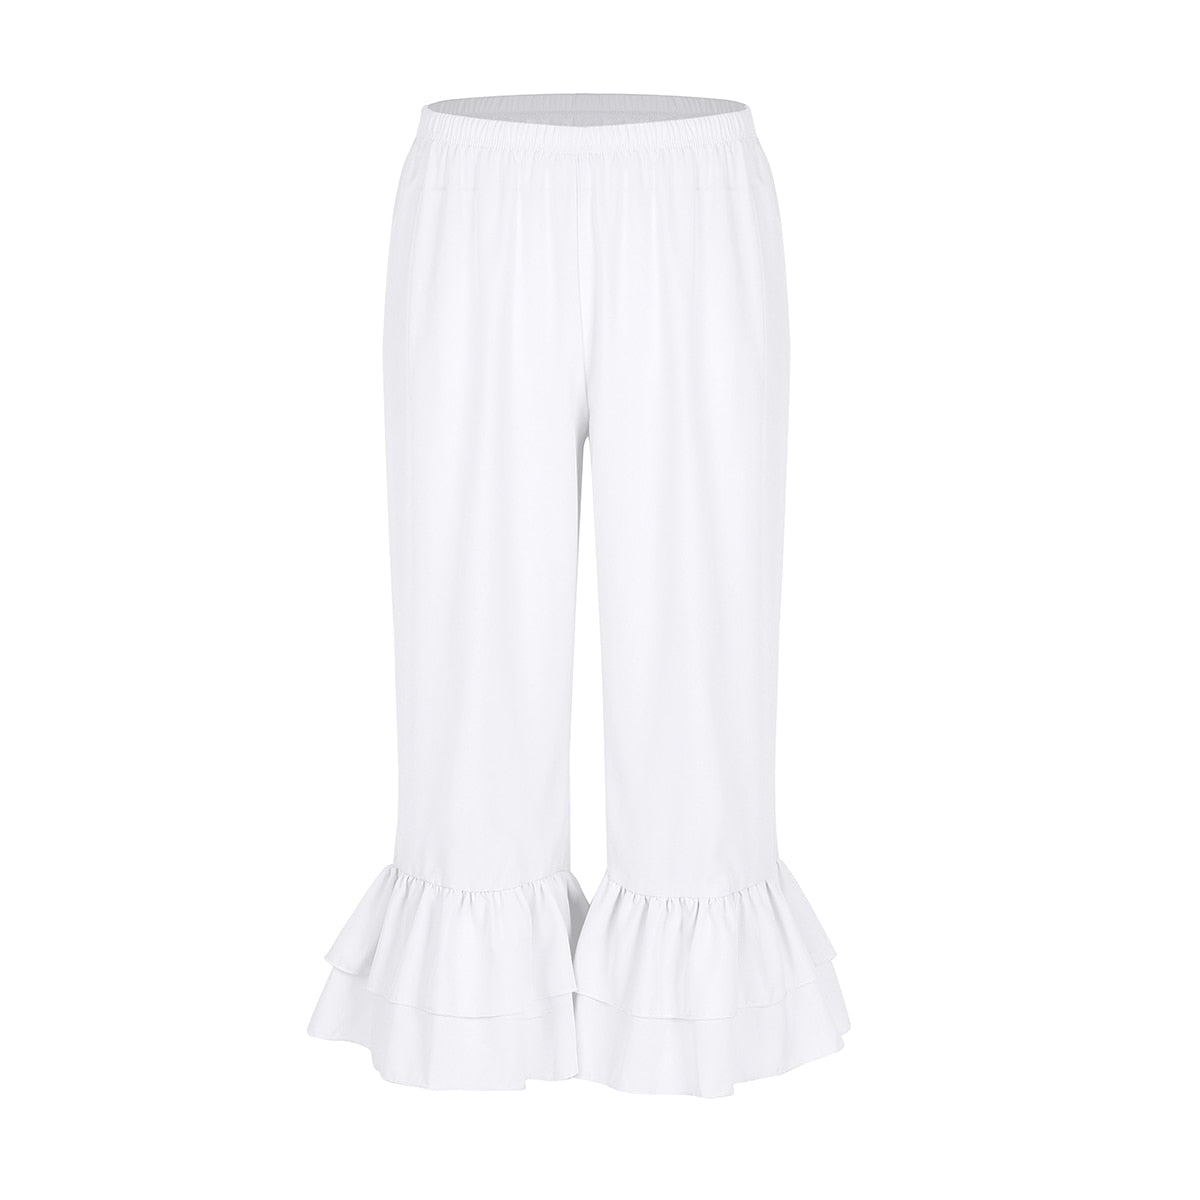 Undercover- the Calf Length Ruffled Bloomers 3 Colors